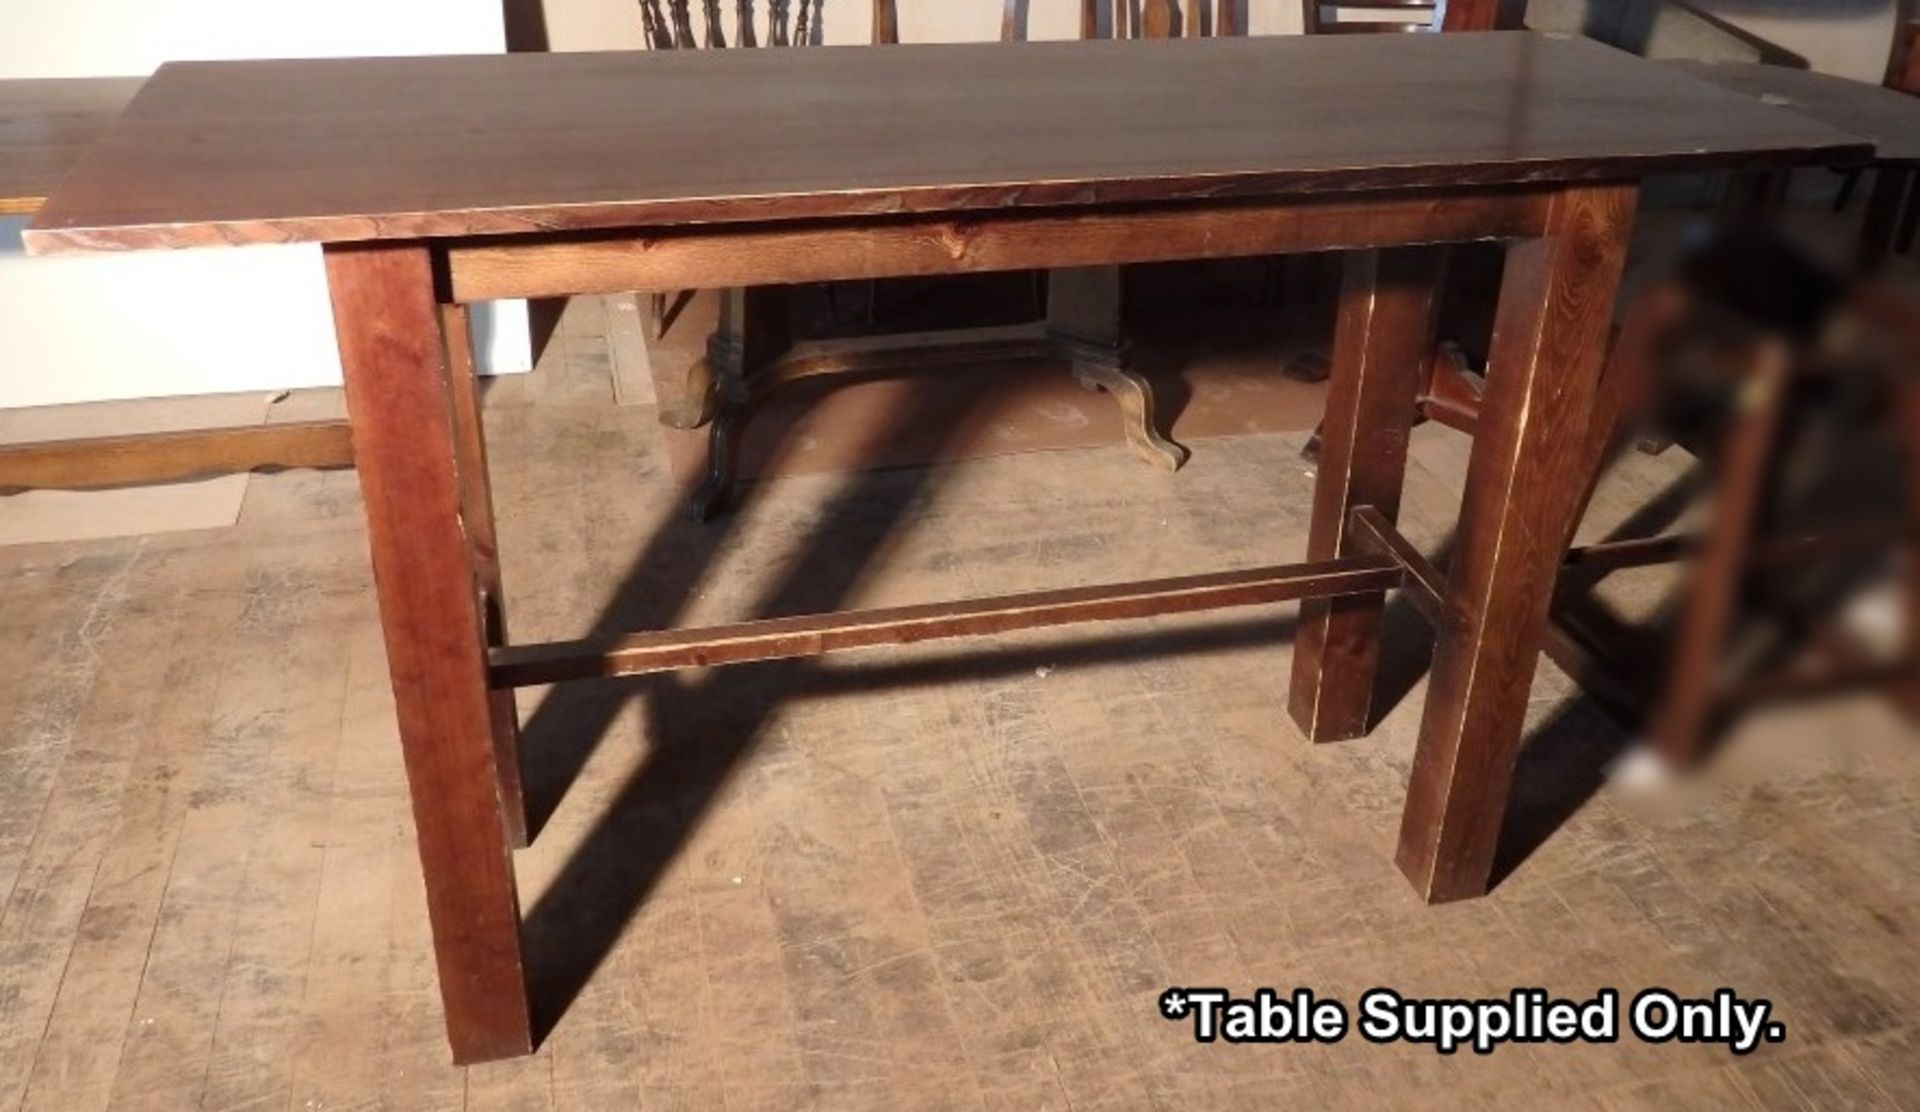 1 x Tall, Sturdy Rectangular Solid Wood Dining Table - Recently Taken From A Bar & Restaurant - Image 2 of 8